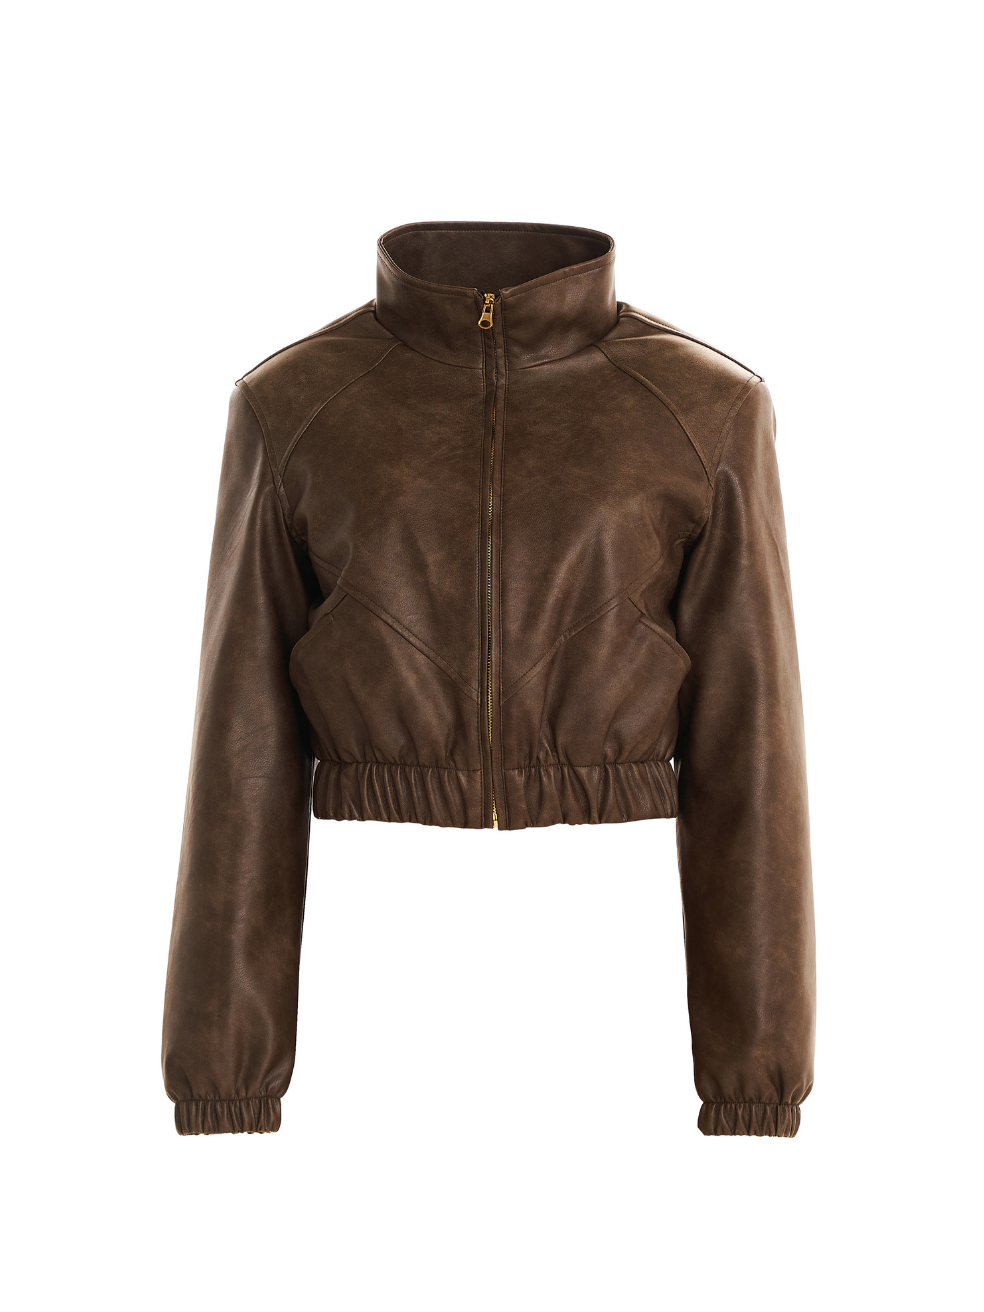 Cropped bomber jacket faux leather vintage brown distressed responsible fashion ethical